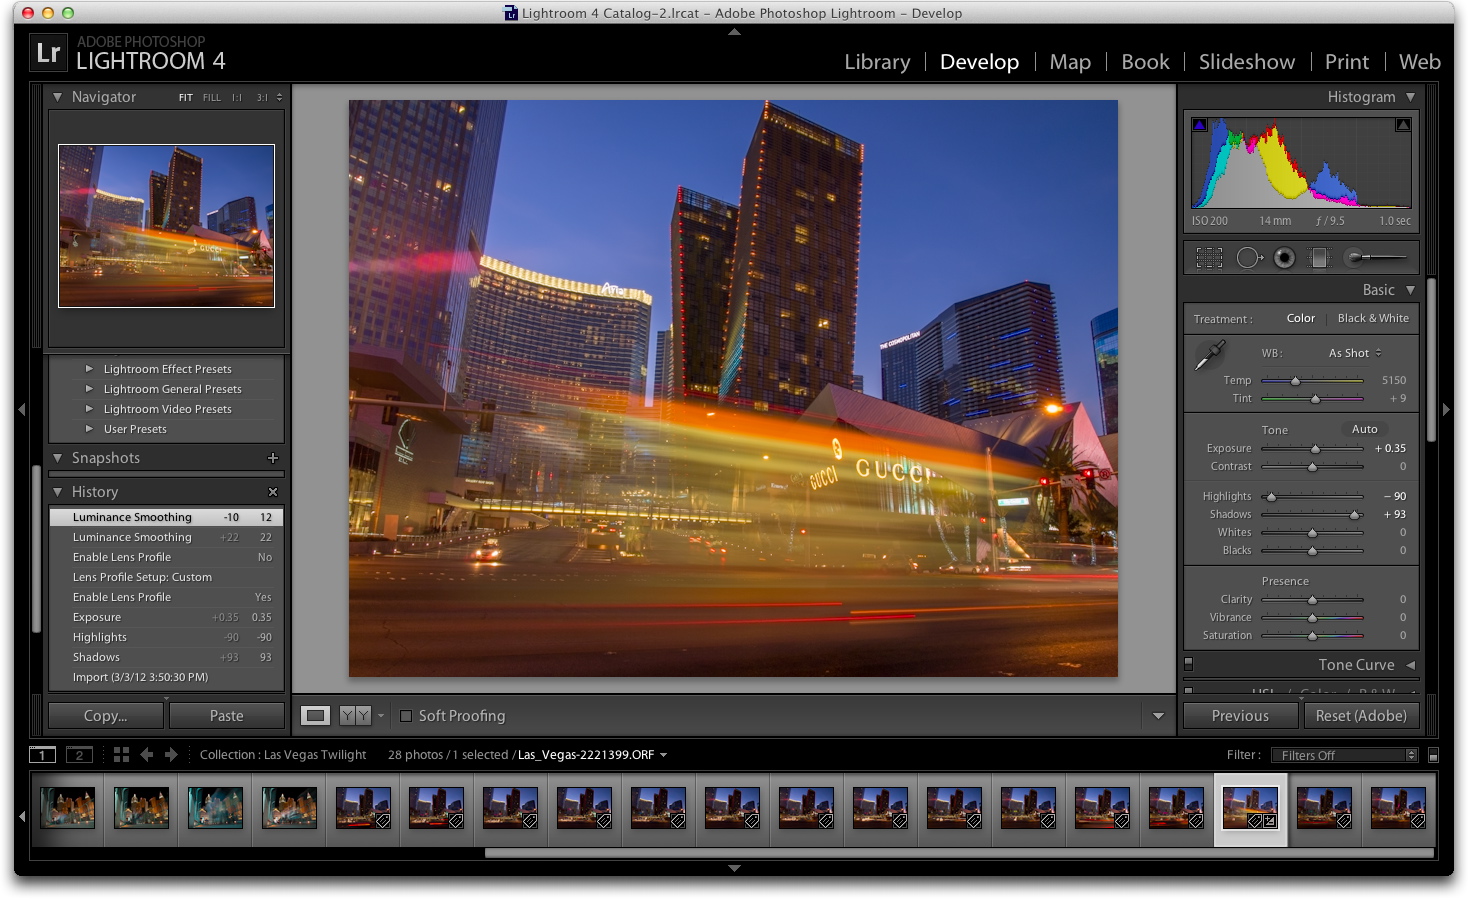 My Favorite Features in Lightroom 4 - The Digital Story